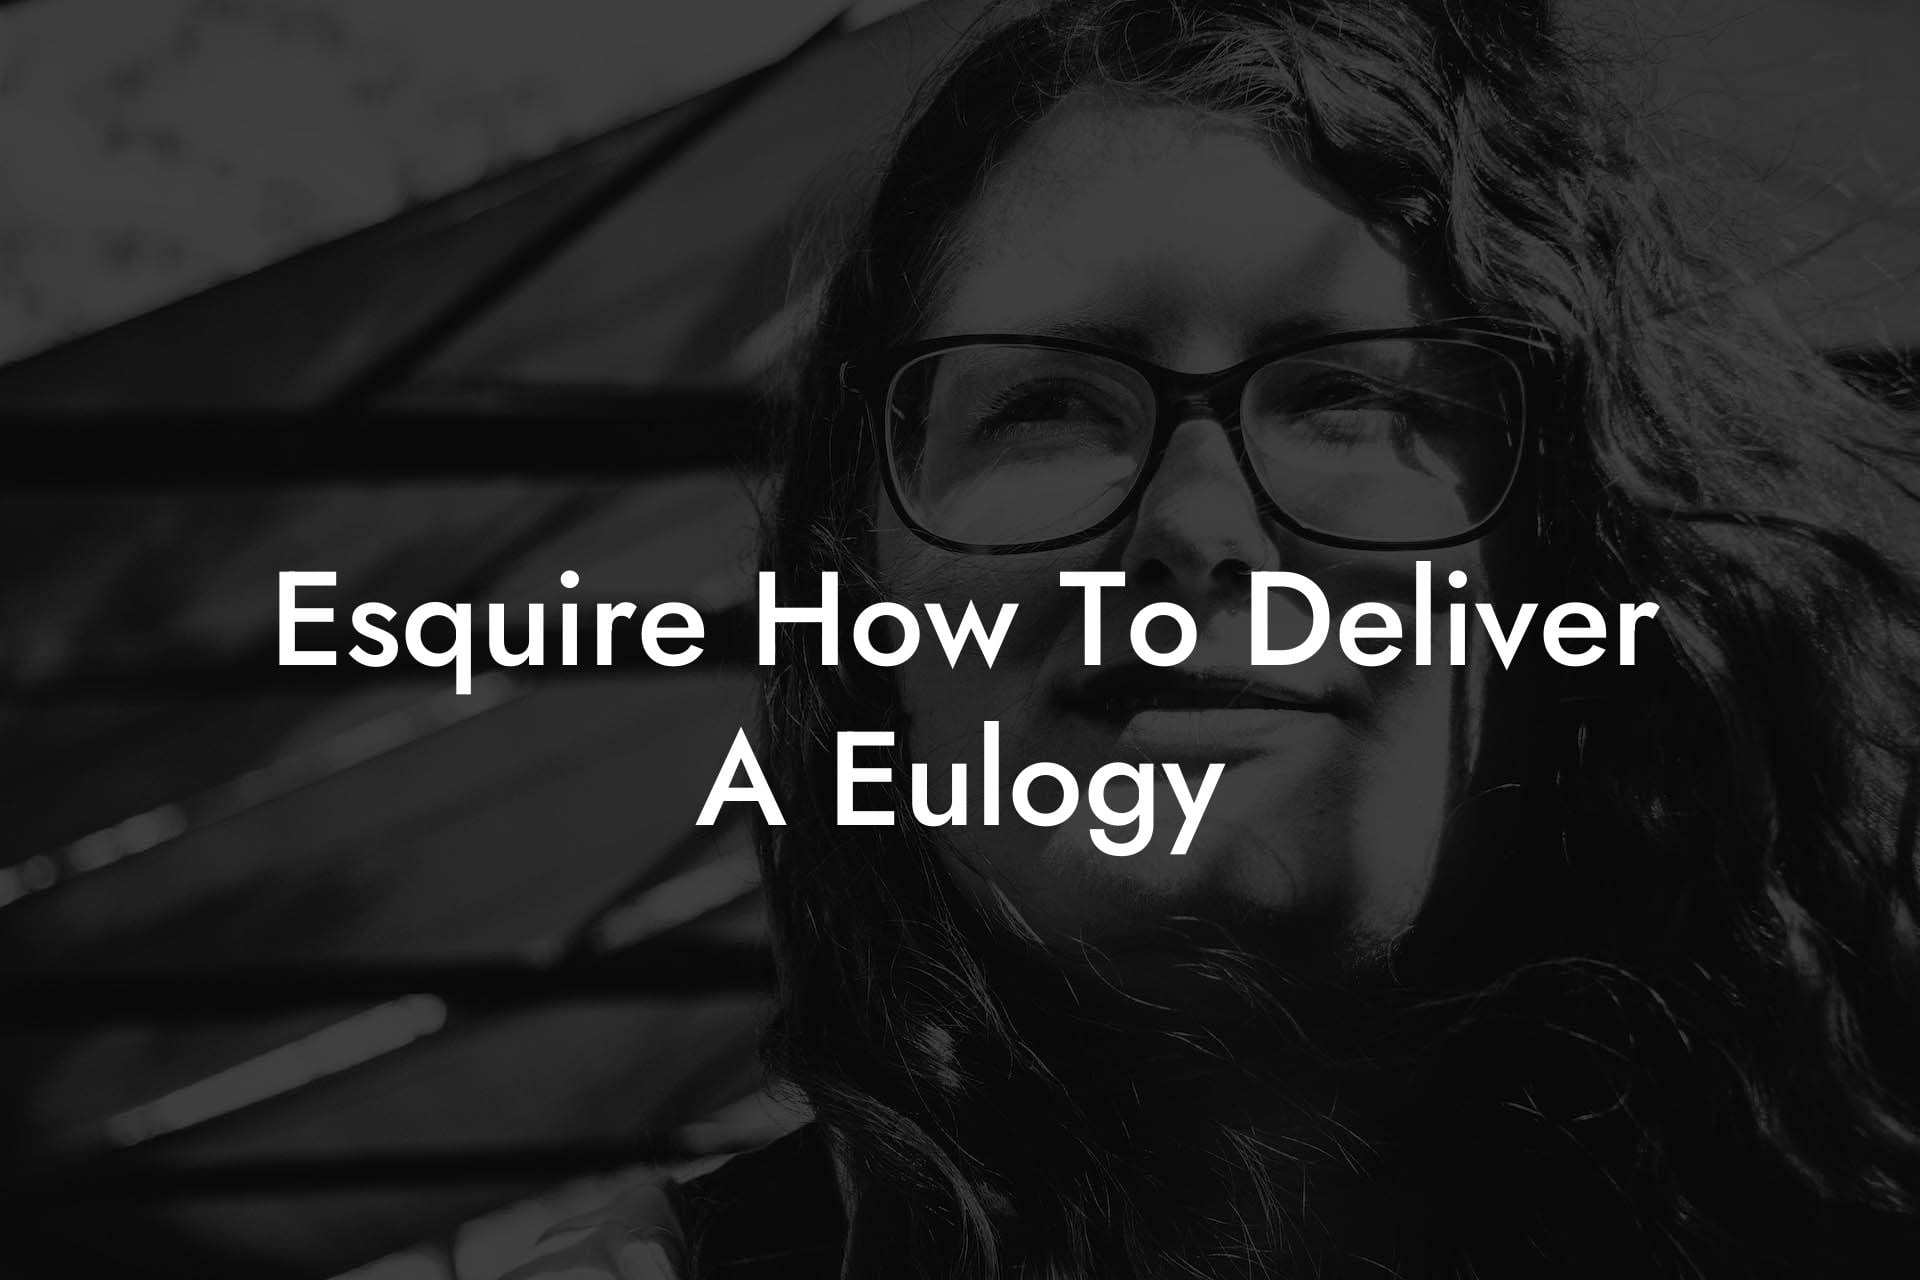 Esquire How To Deliver A Eulogy